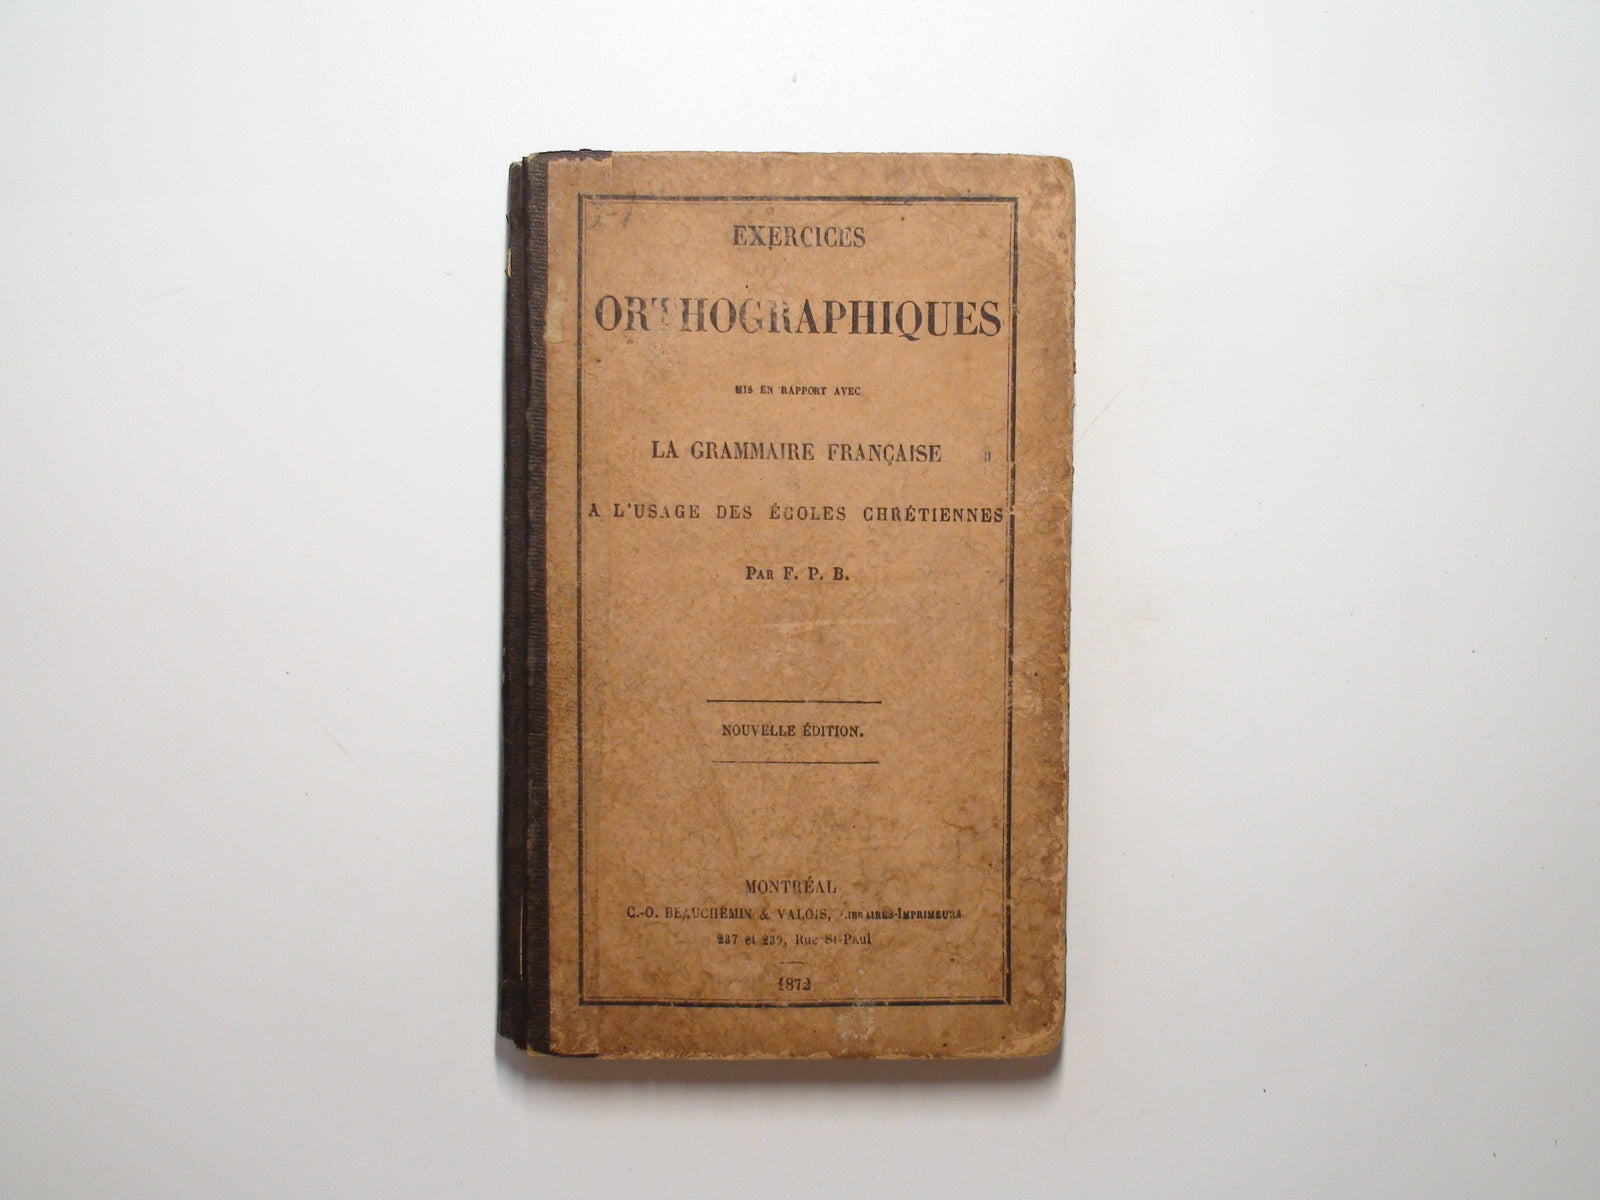 Exercices Orthographiques, Grammaire Francaise, F. P. B., New Edition, 1872